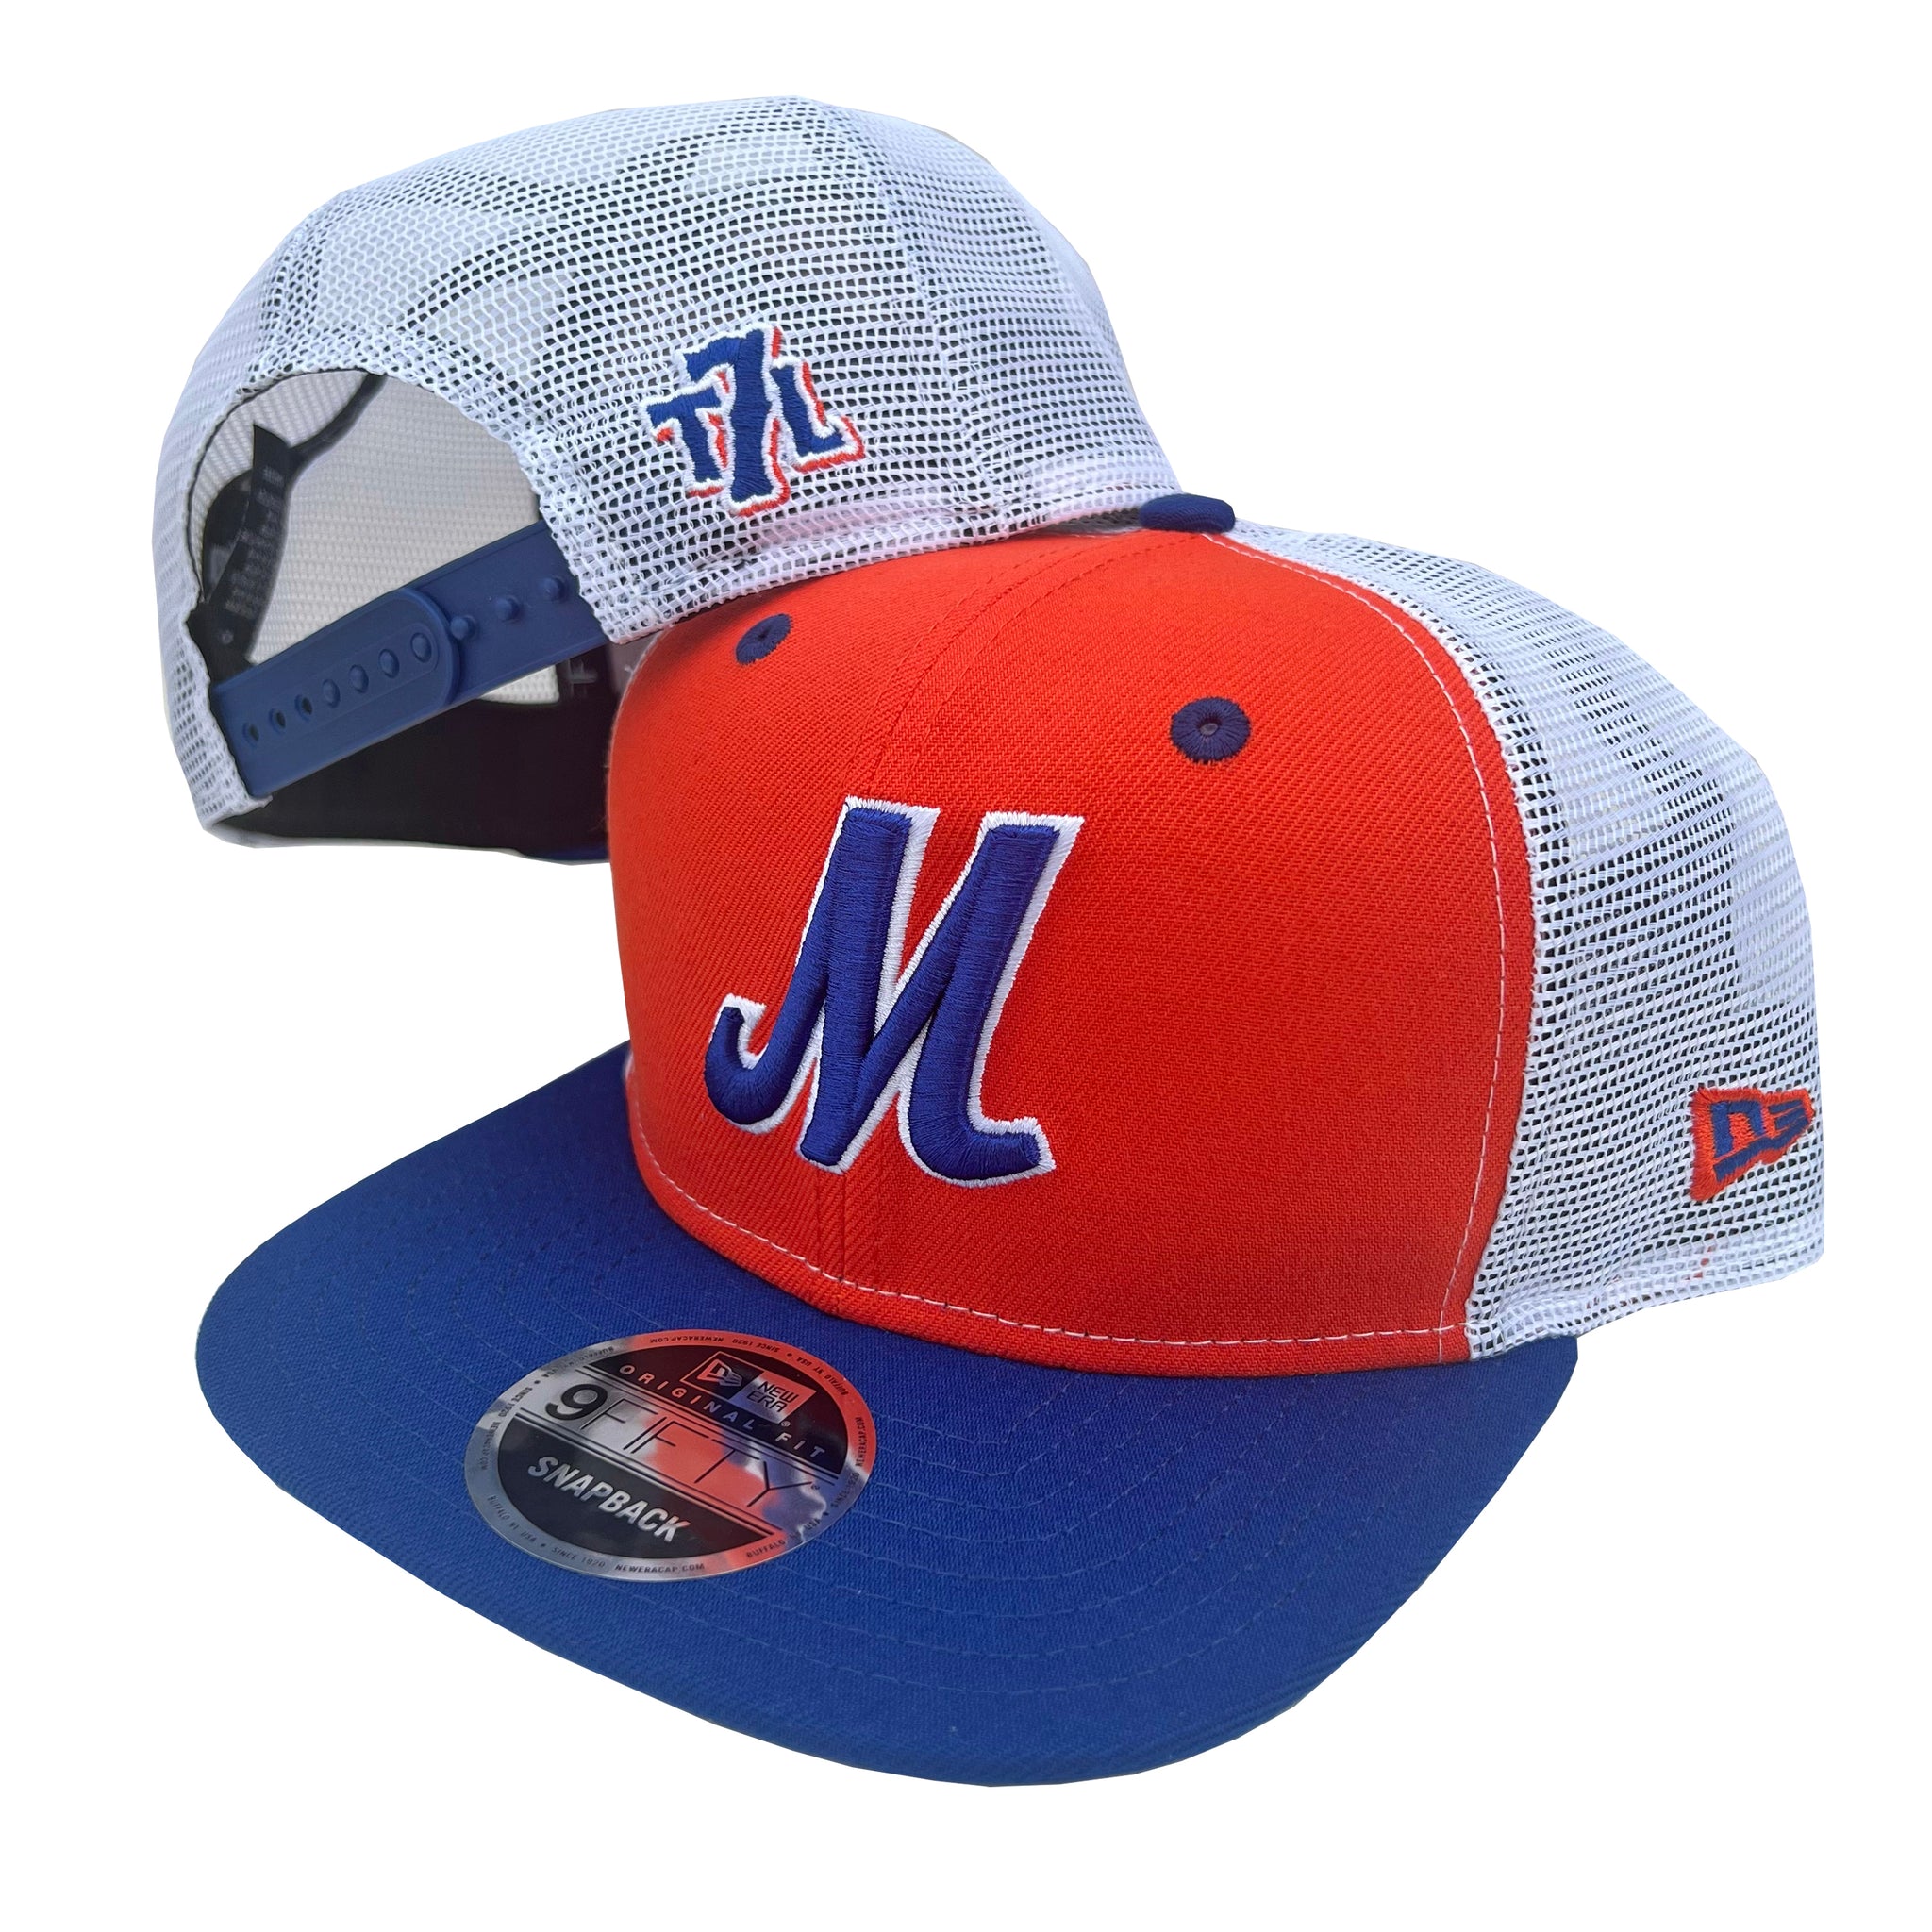 Check out New Era's 2023 New York Mets Spring Training hat